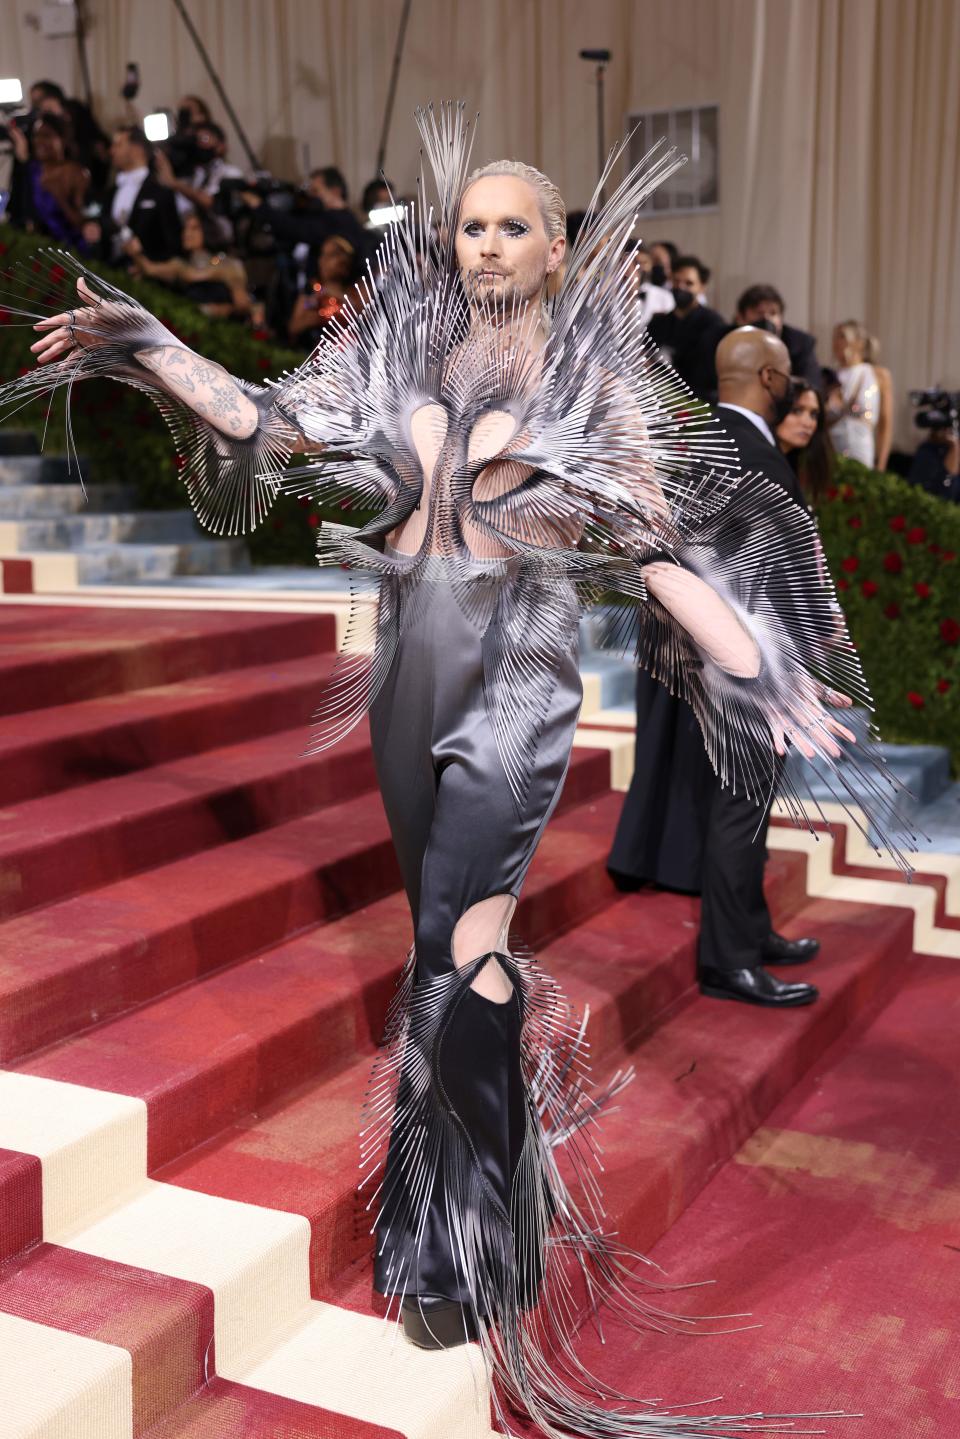 Fredrik in an ombre metallic sculptural piece with sharp thin pieces of material coming out around his shoulders, arms, and legs. He's wearing metallic ombre pants but his torso and arms are expose besides the spiky pieces attached to a sheer underlay fabric.